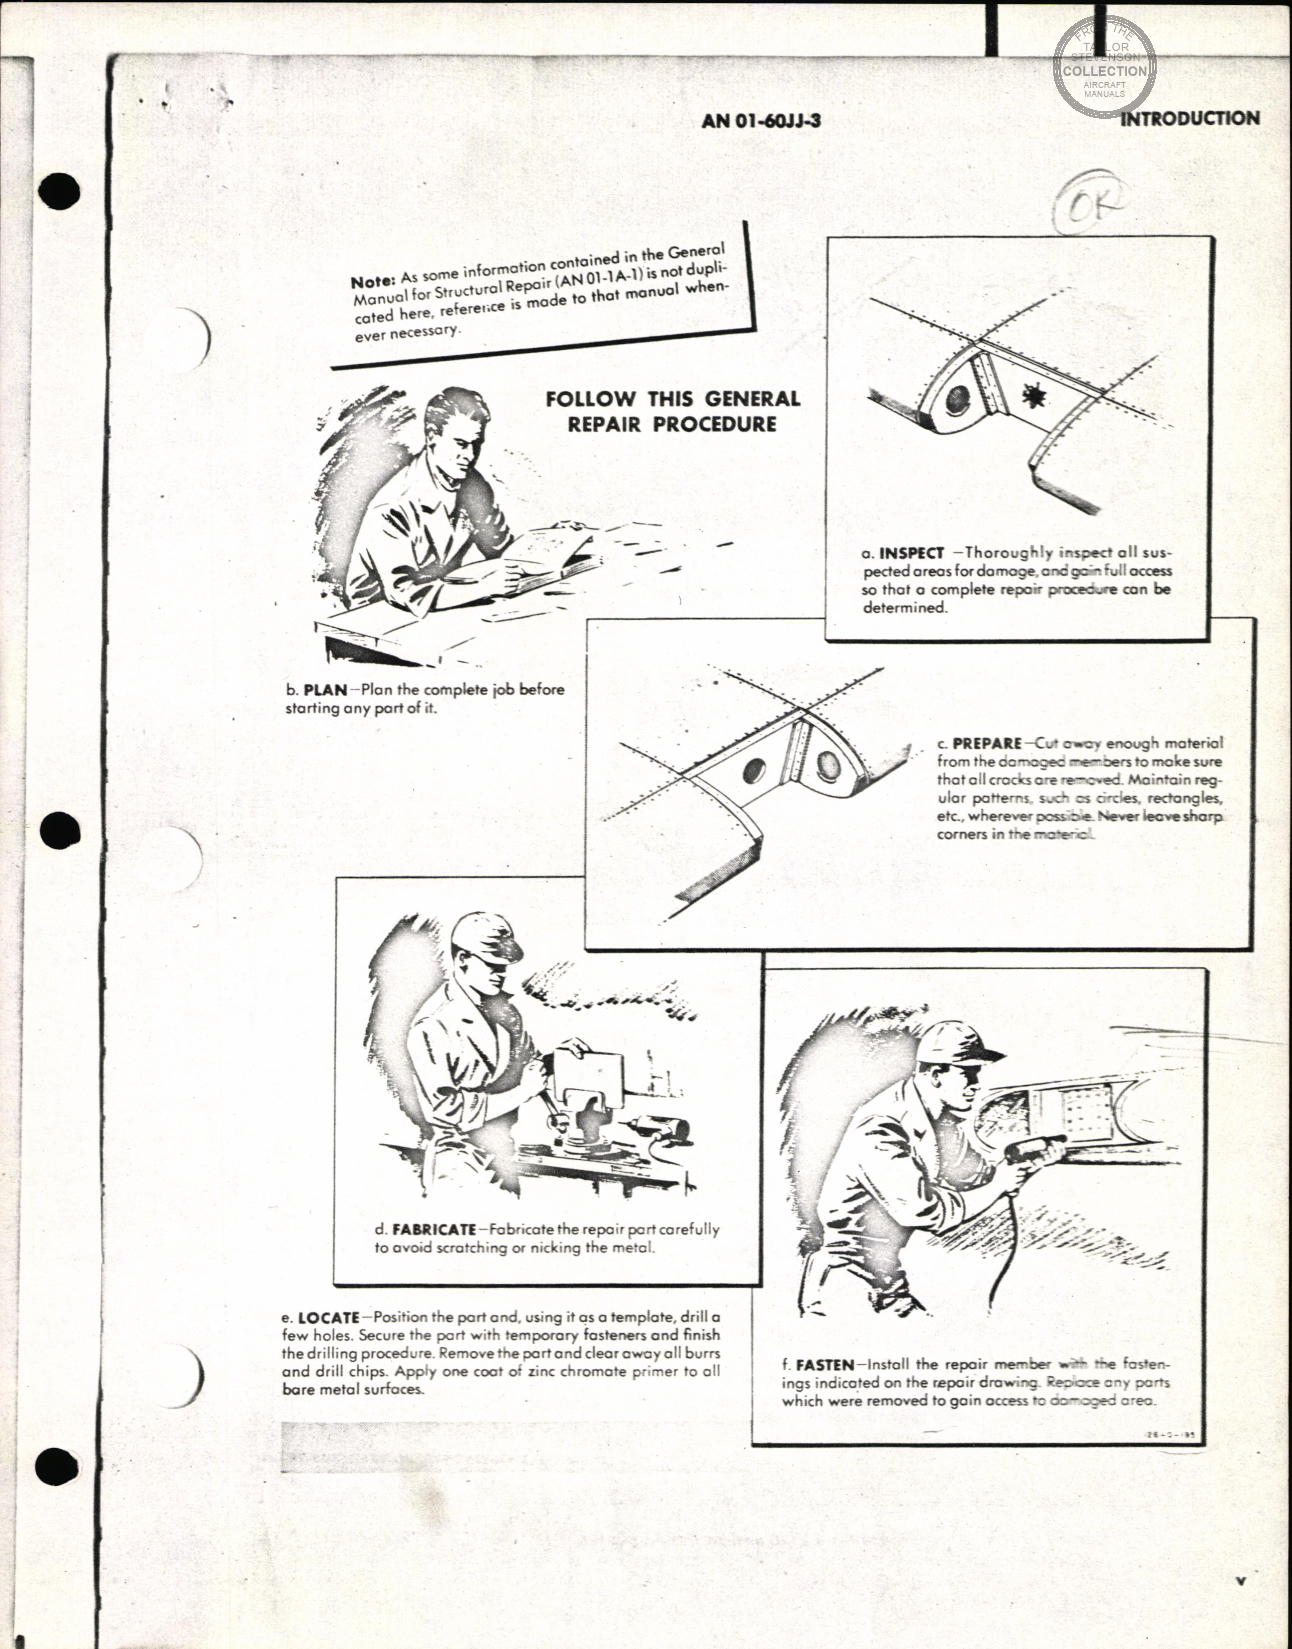 Sample page 5 from AirCorps Library document: Structural Repair Instructions for P-83B, P-83E, P-82F, and P-82G